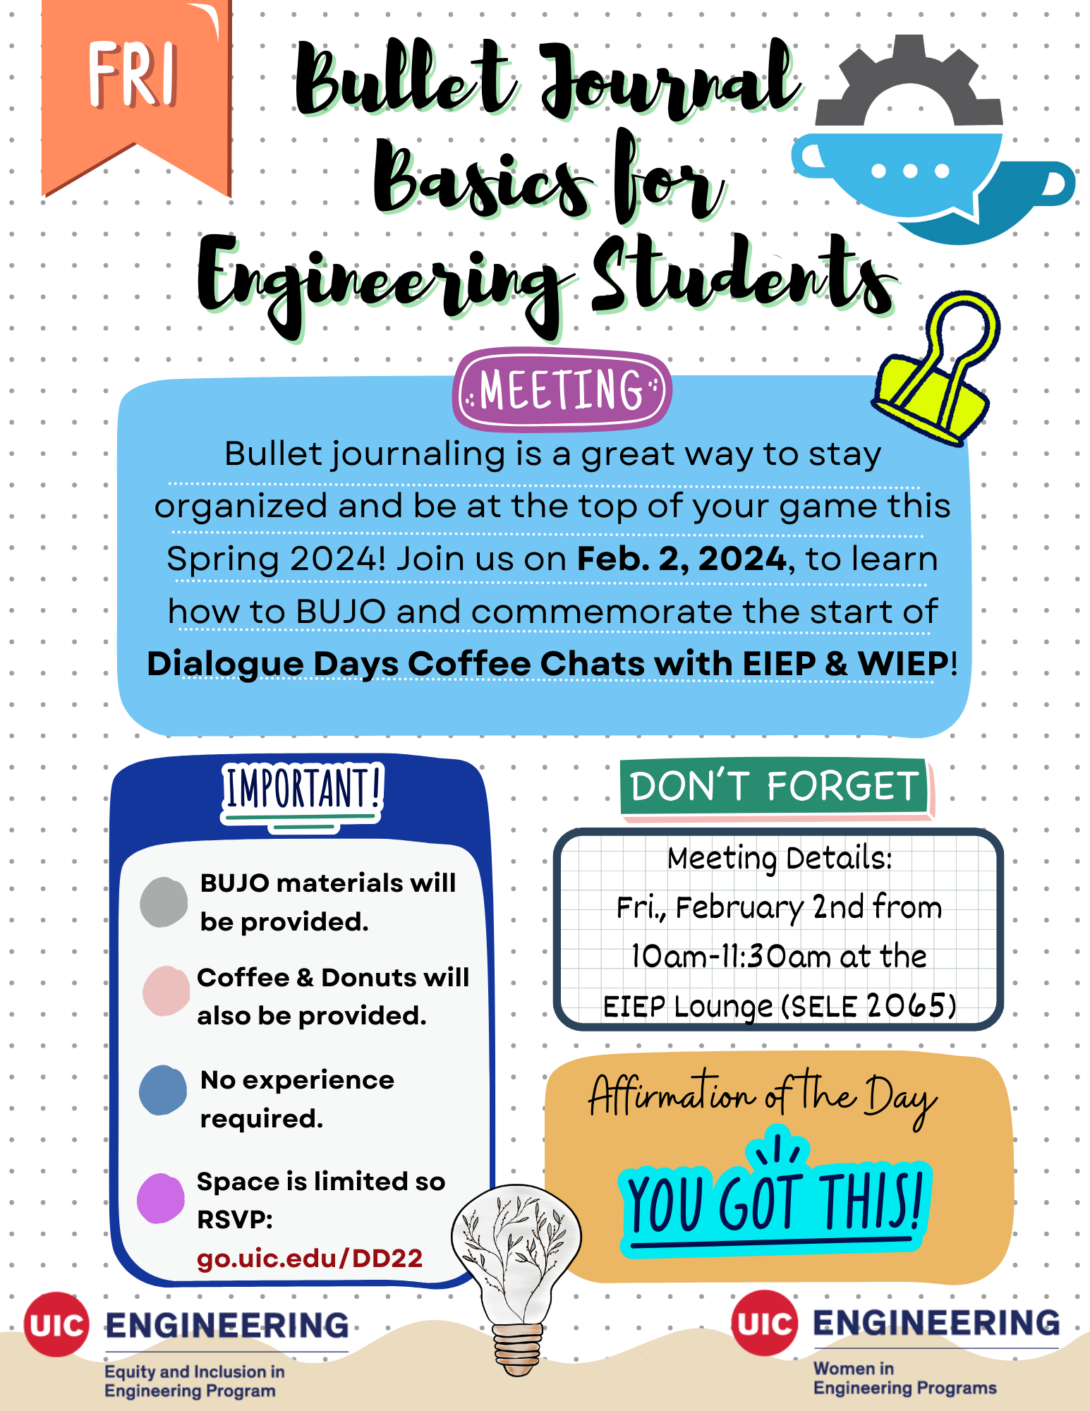 Dialogue Days: Bullet Journal Basics for Engineering Students